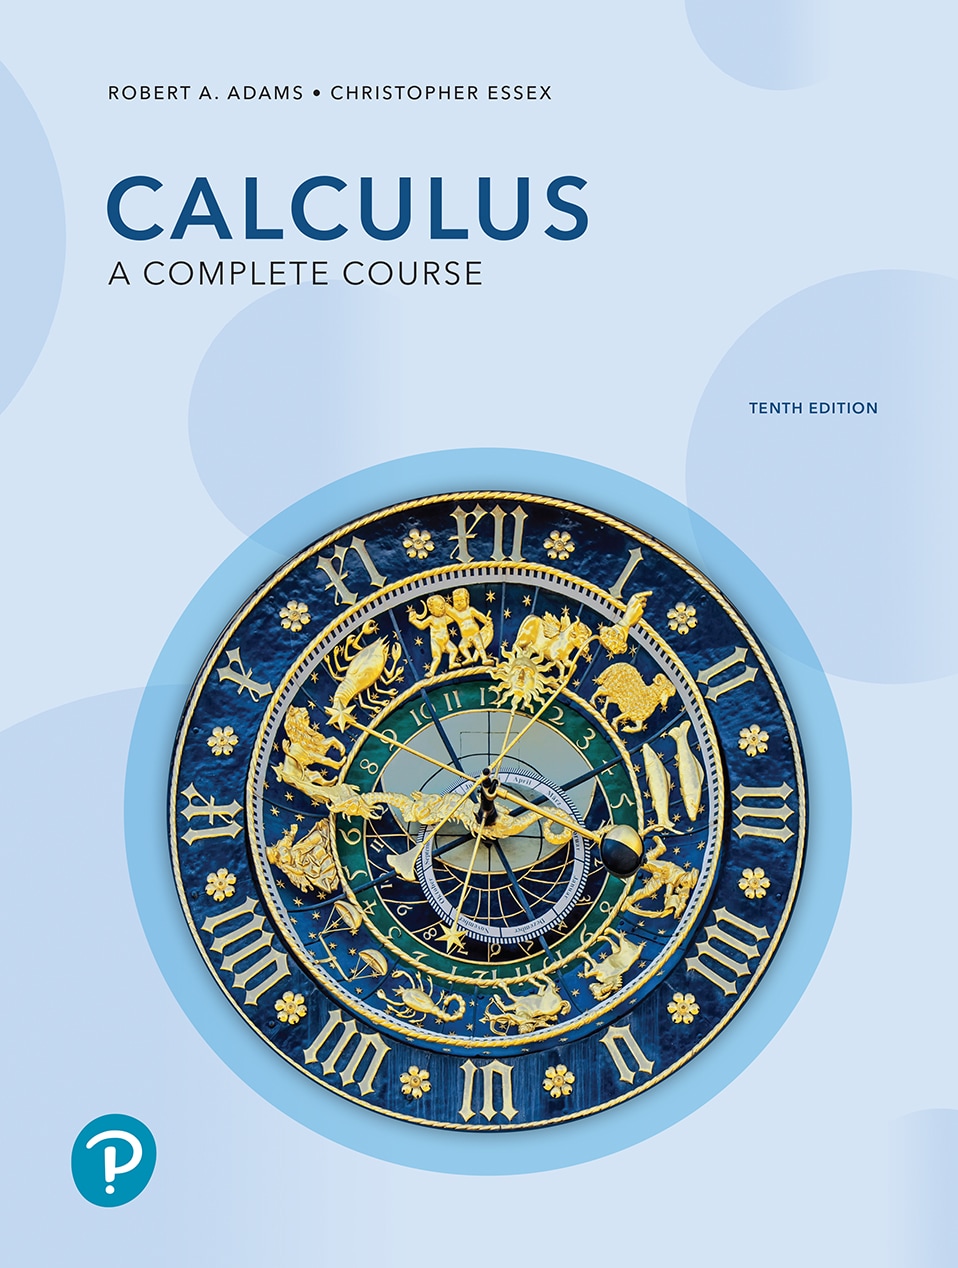 <img alt="Calculus: A Complete Course, 10th Edition. Robert A. Adams and Christopher Essex">